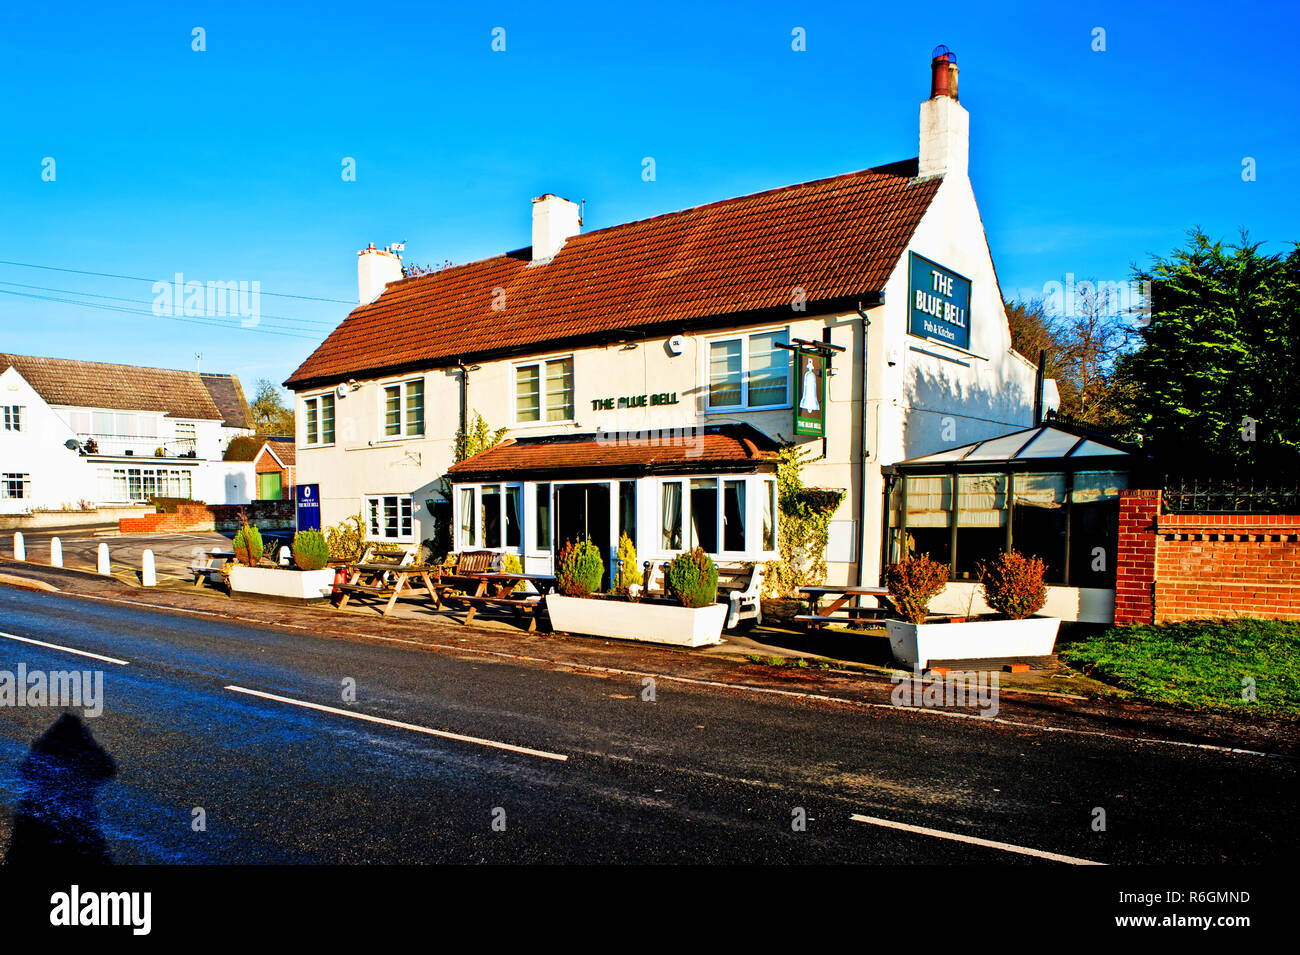 The Blue Bell, Bishopton, Stockton on Tees, Cleveland, England Stock Photo